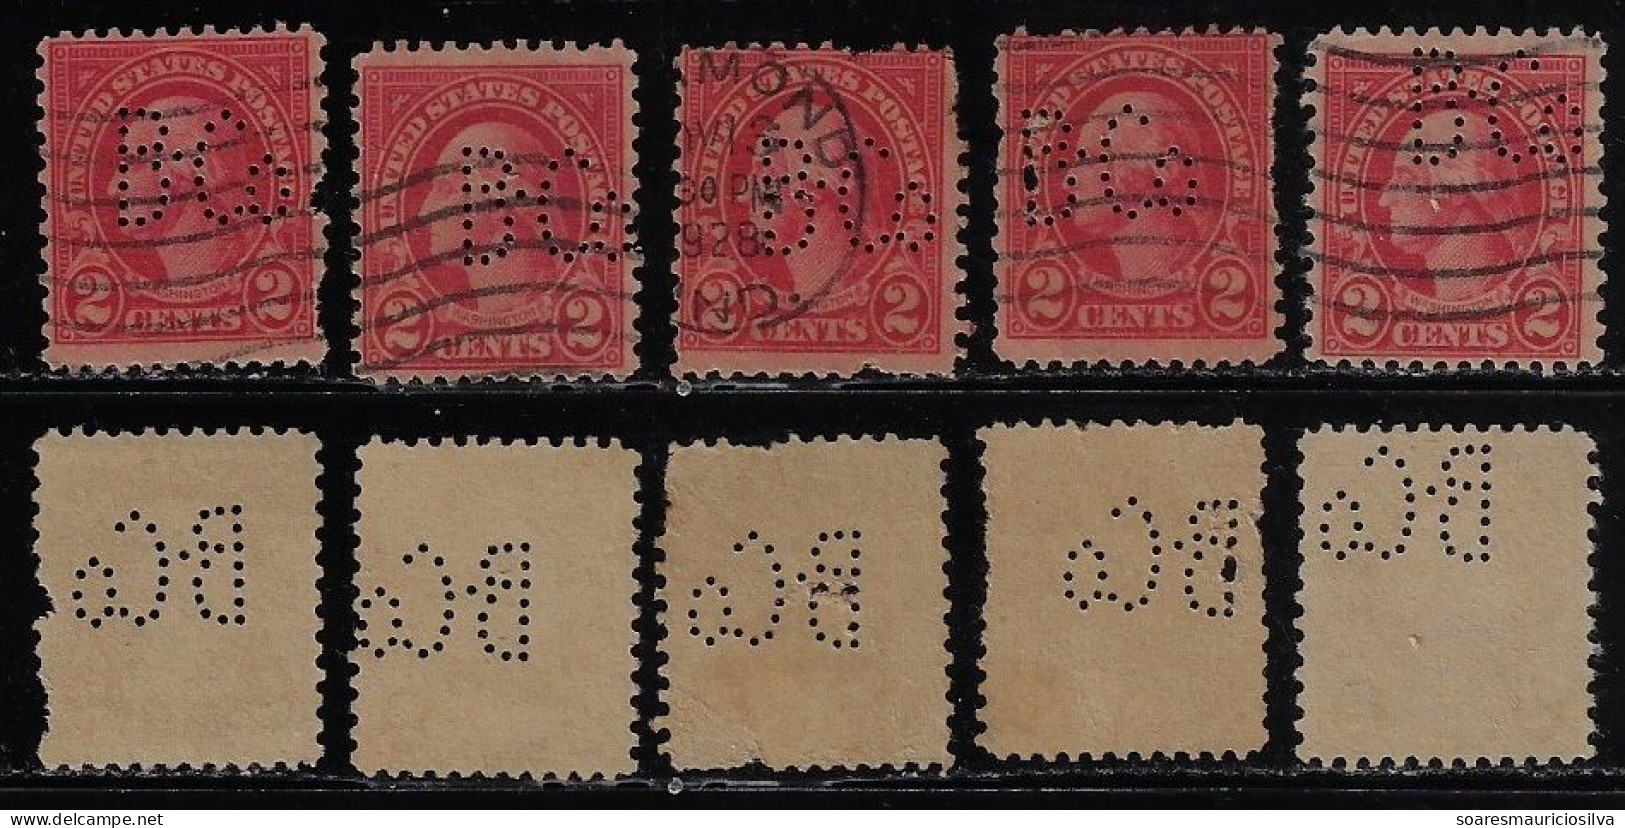 USA United States 1923/1934 5 Stamp With Perfin B.Co By Frank S. Betz Company From Hammond Lochung Perfore - Perforados